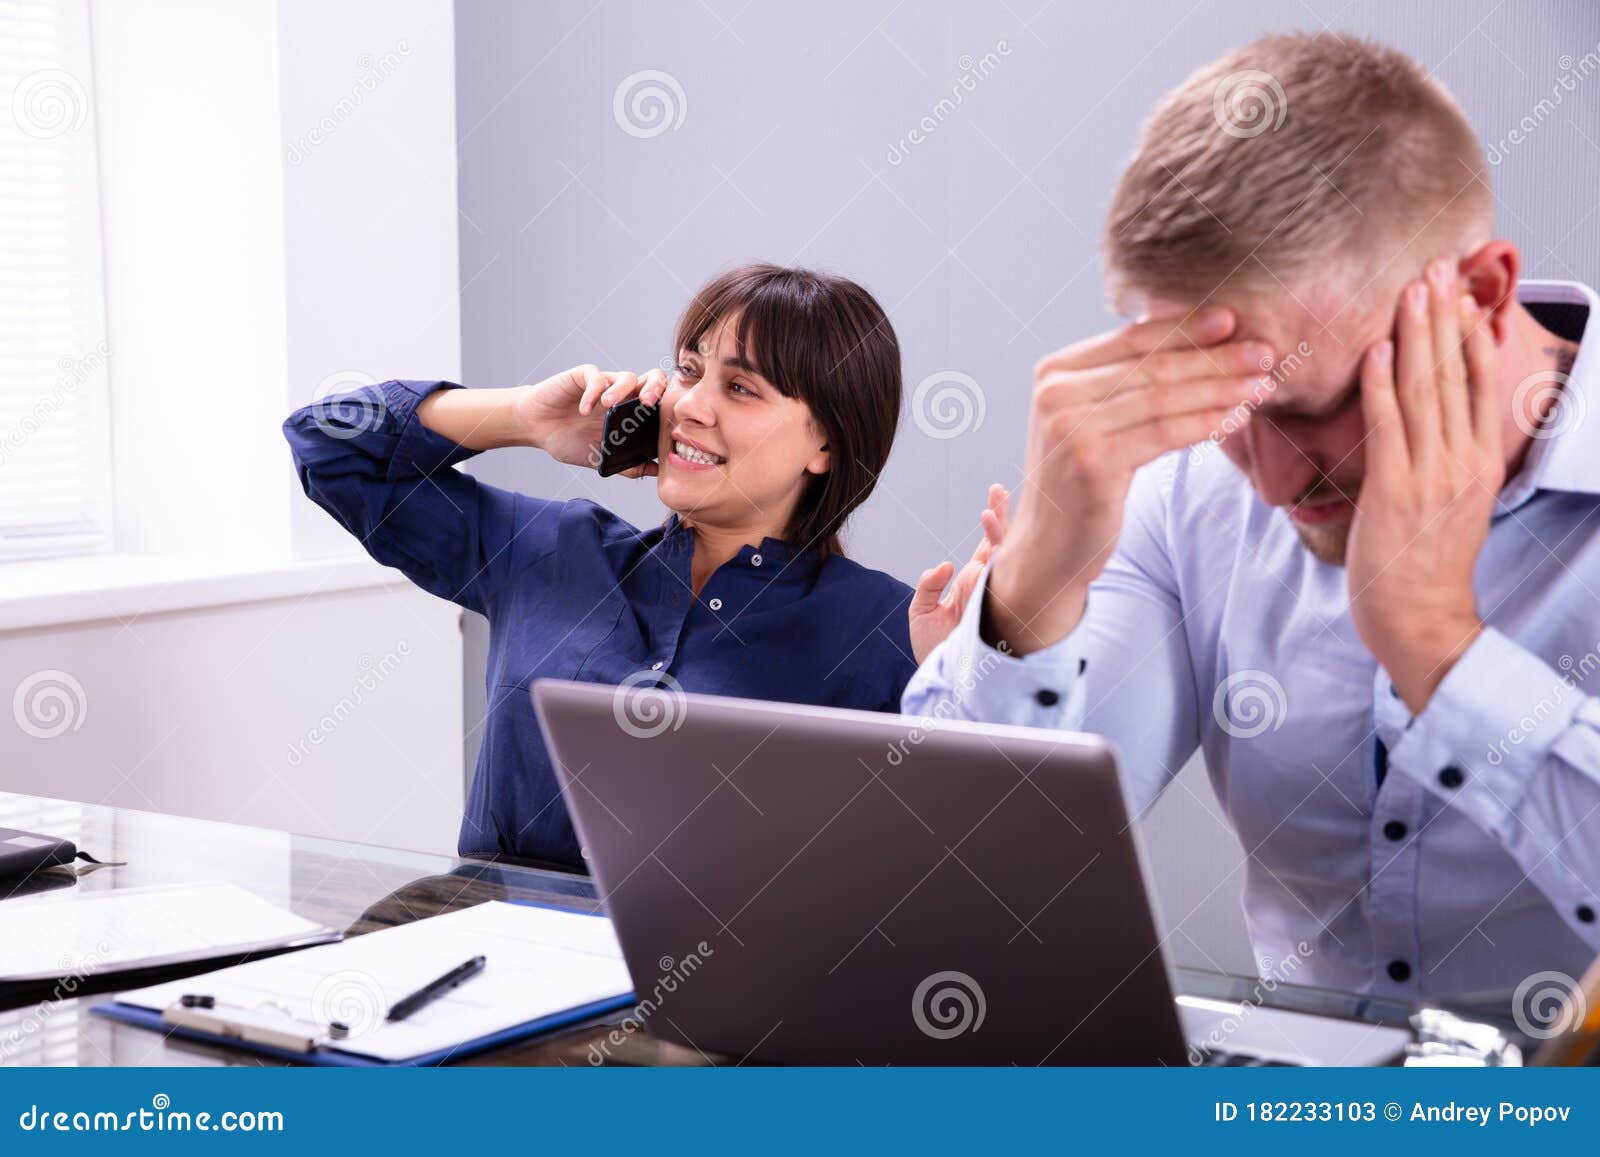 businessman getting irritated with colleague talking on phone